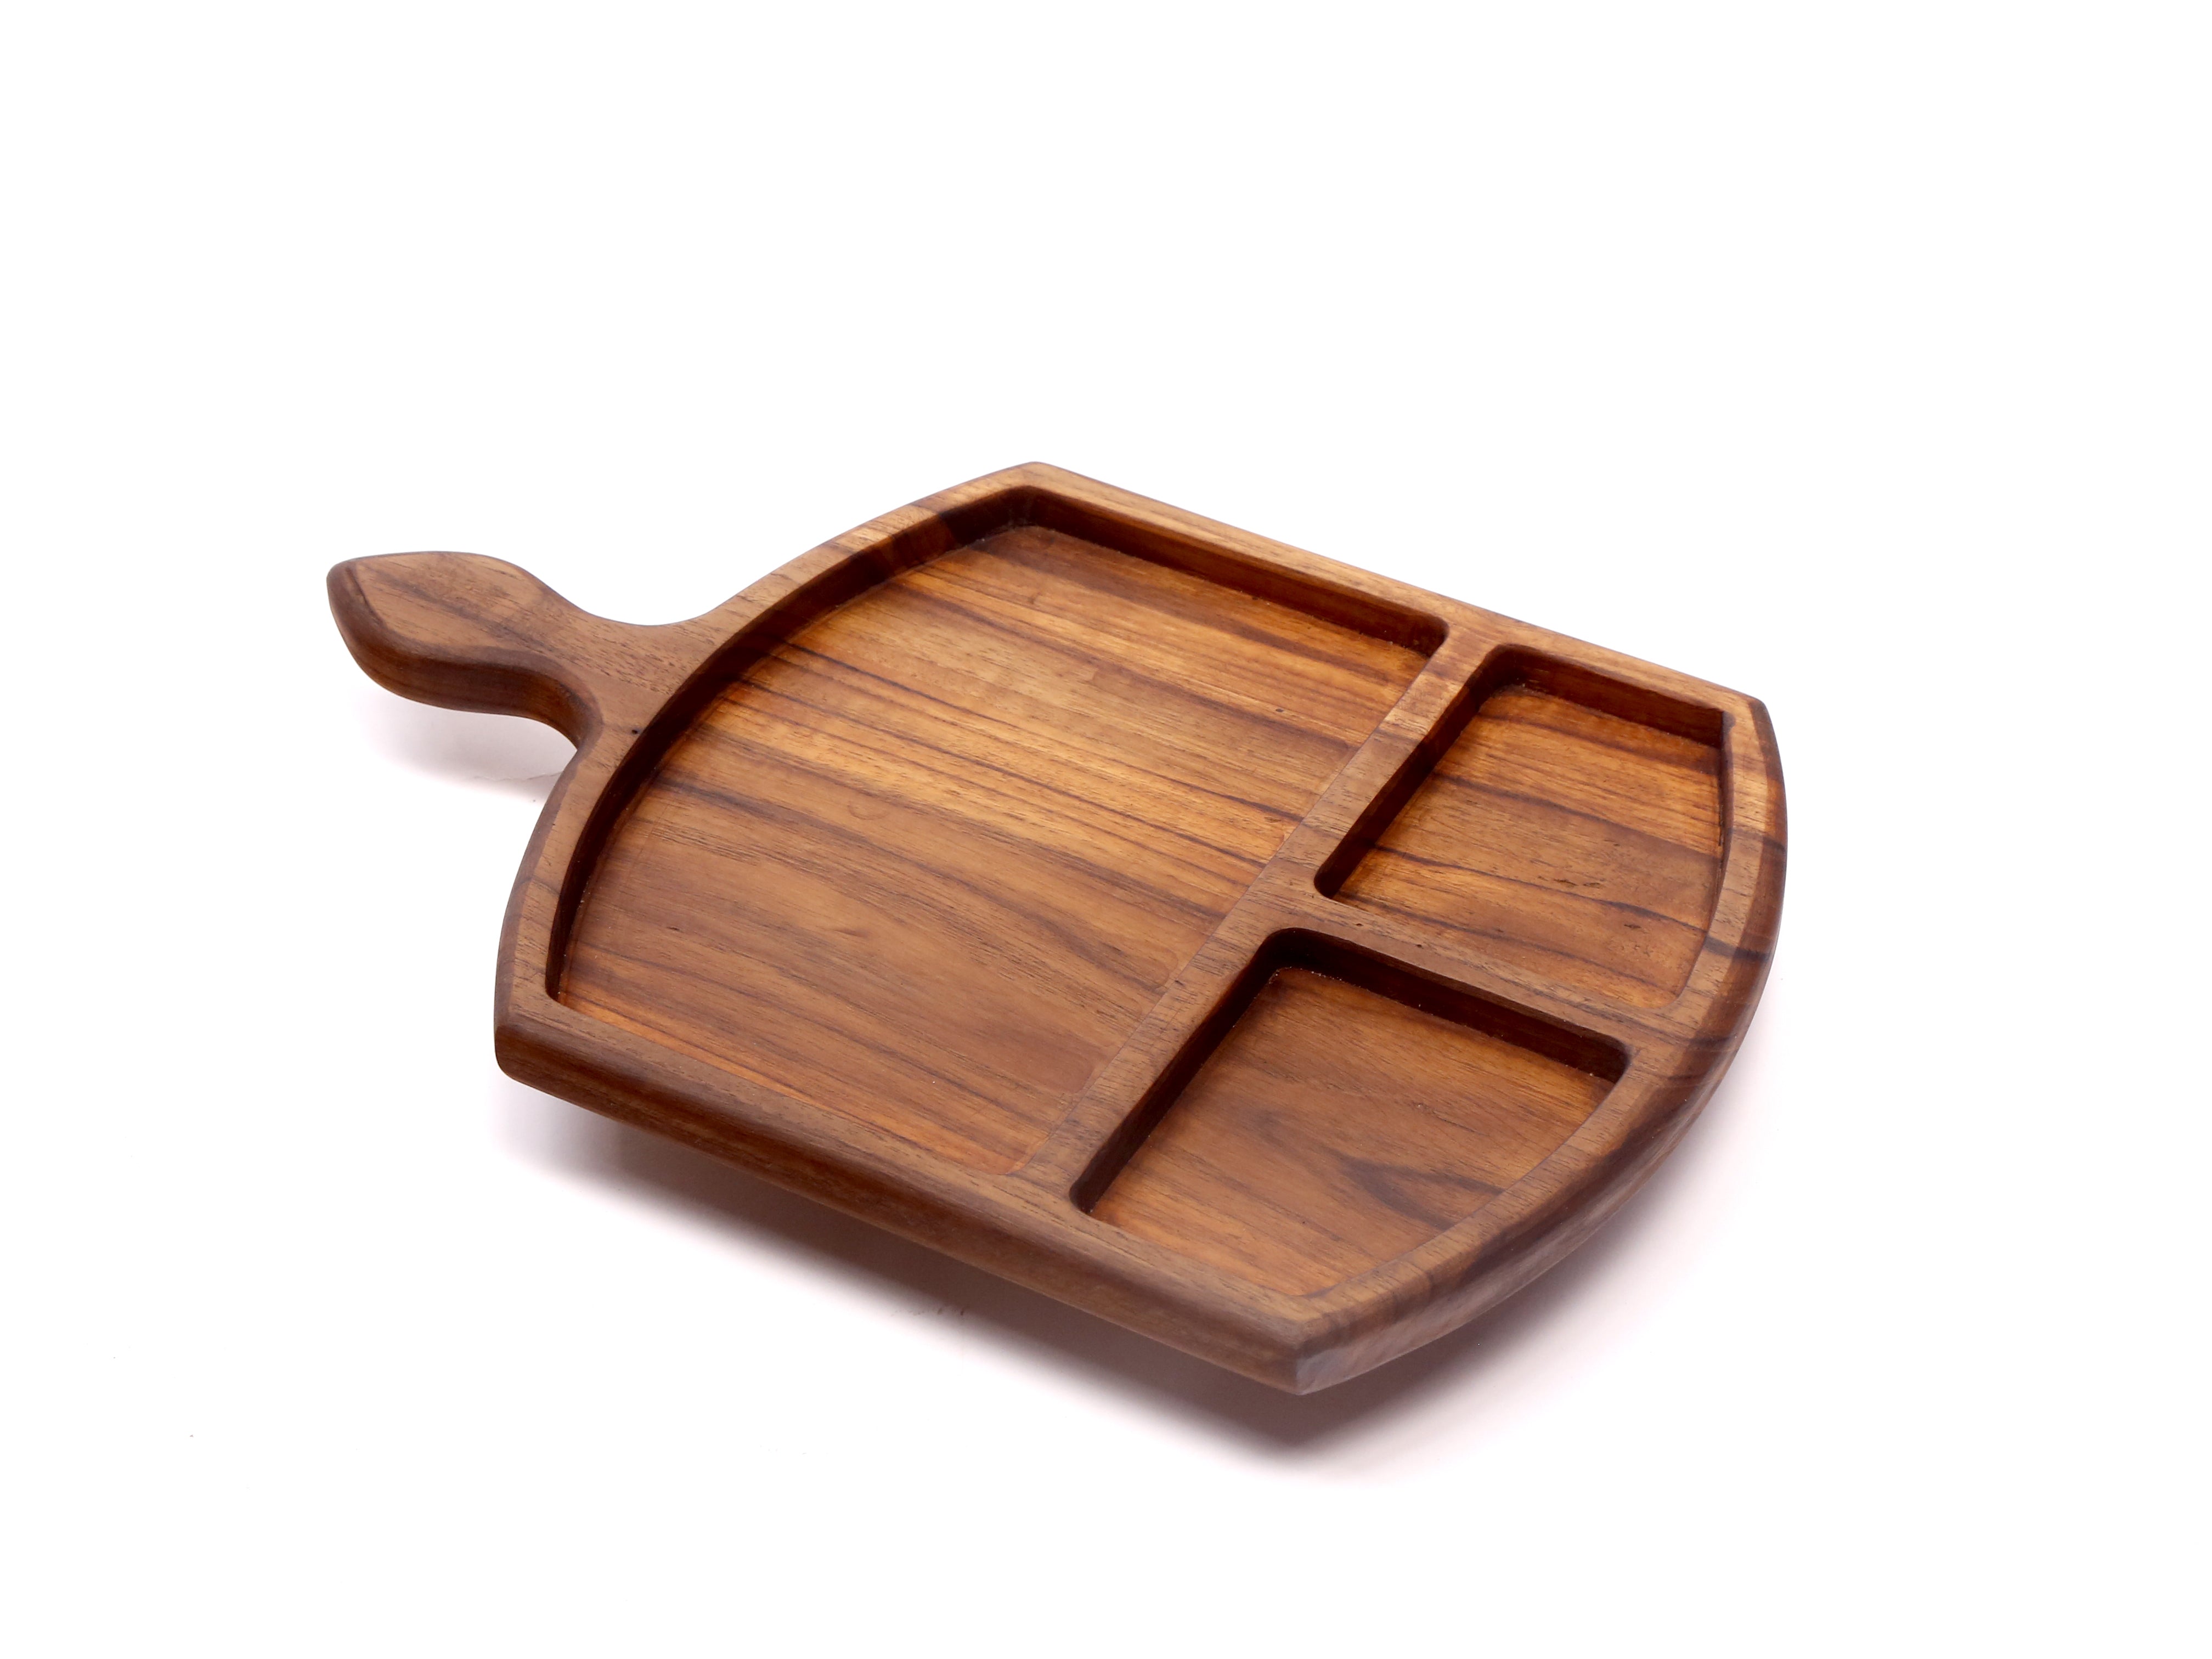 Pan Shaped Wooden Tray Small (14 x 9 x 0.5 Inch) Platter